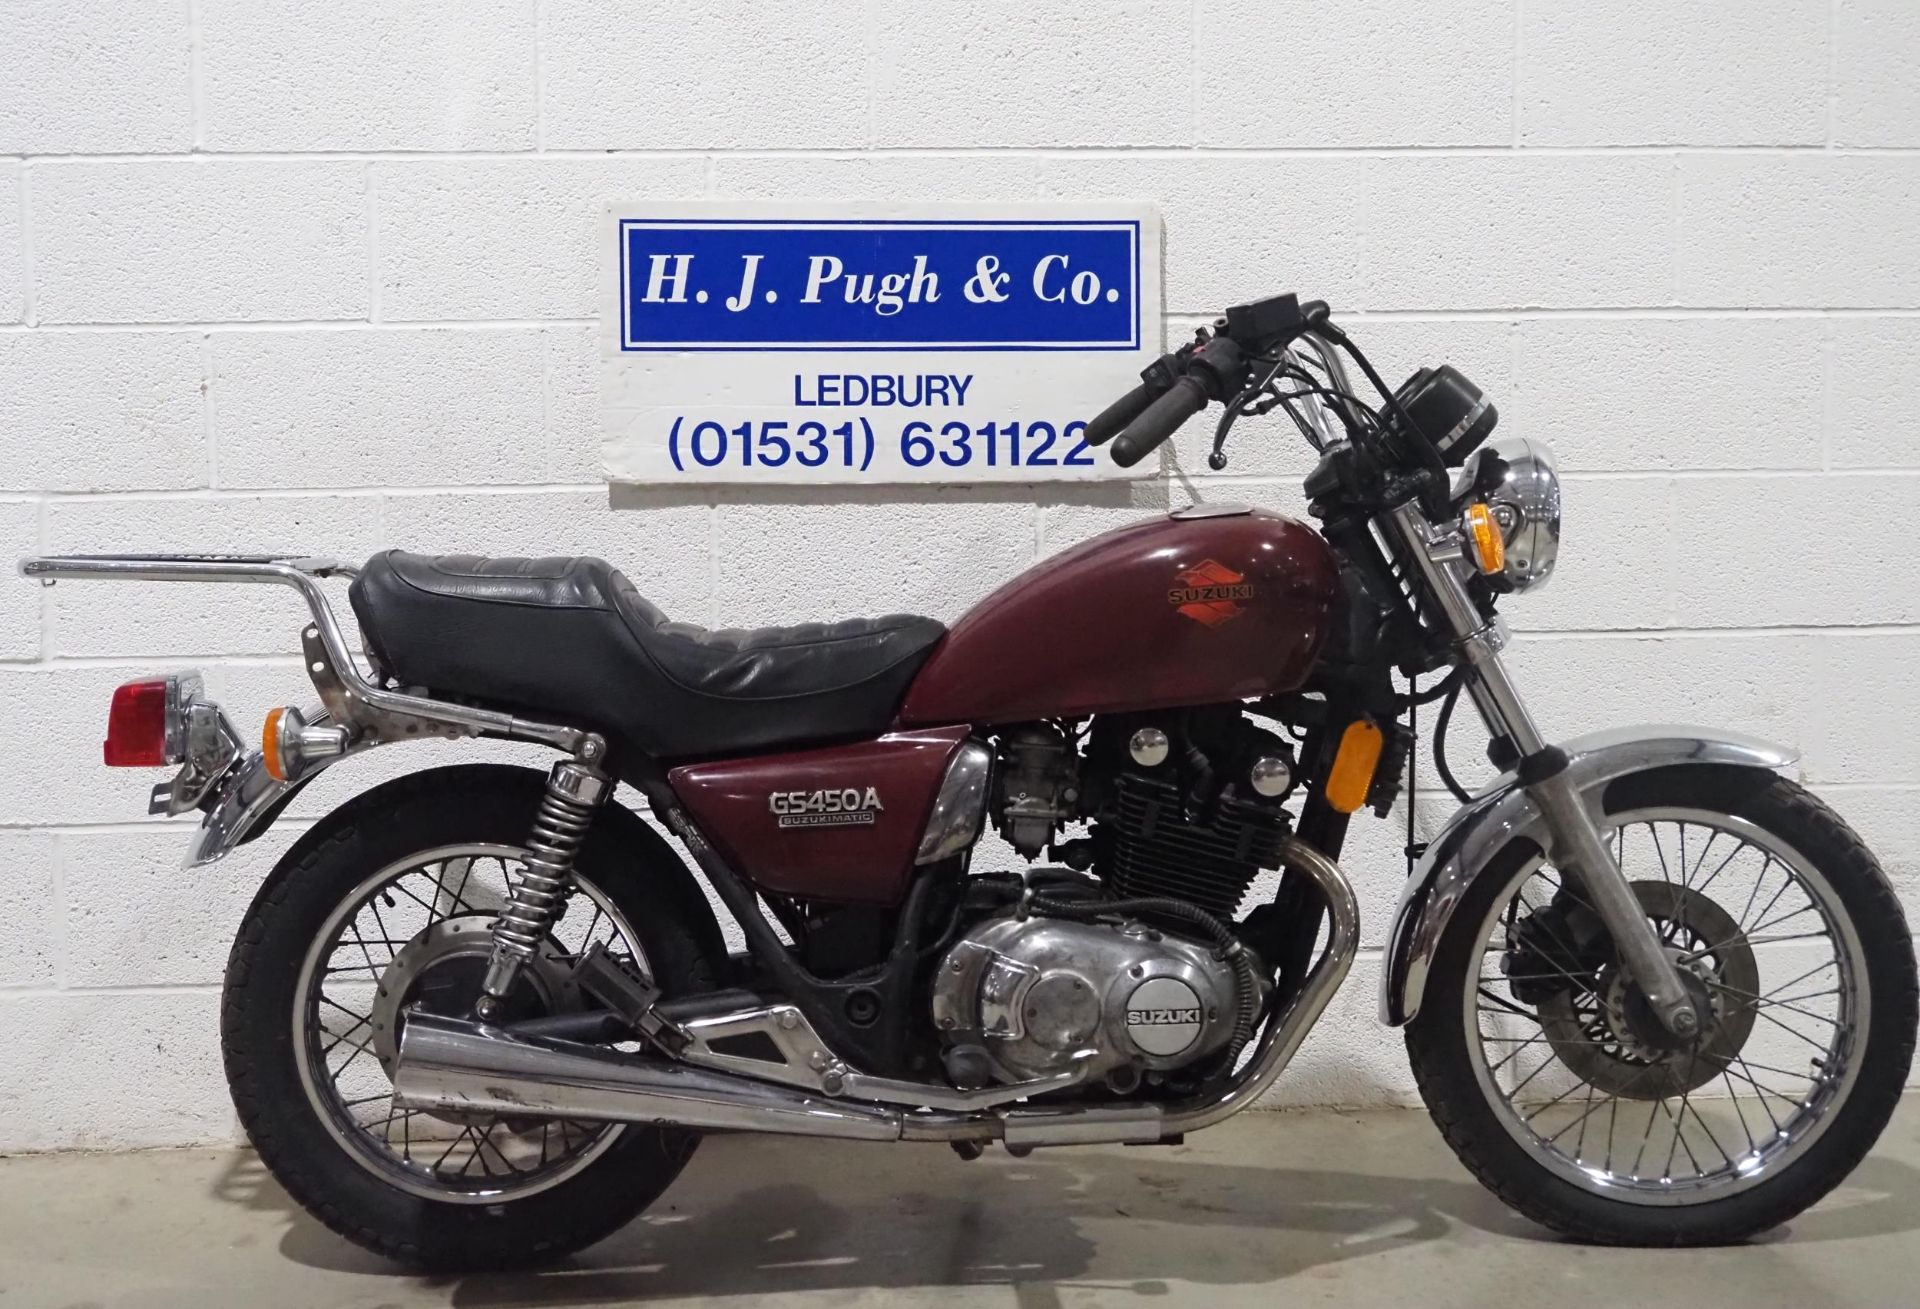 Suzuki GS450 motorcycle. Runs but will require recommissioning. Import. Come with Nova document.